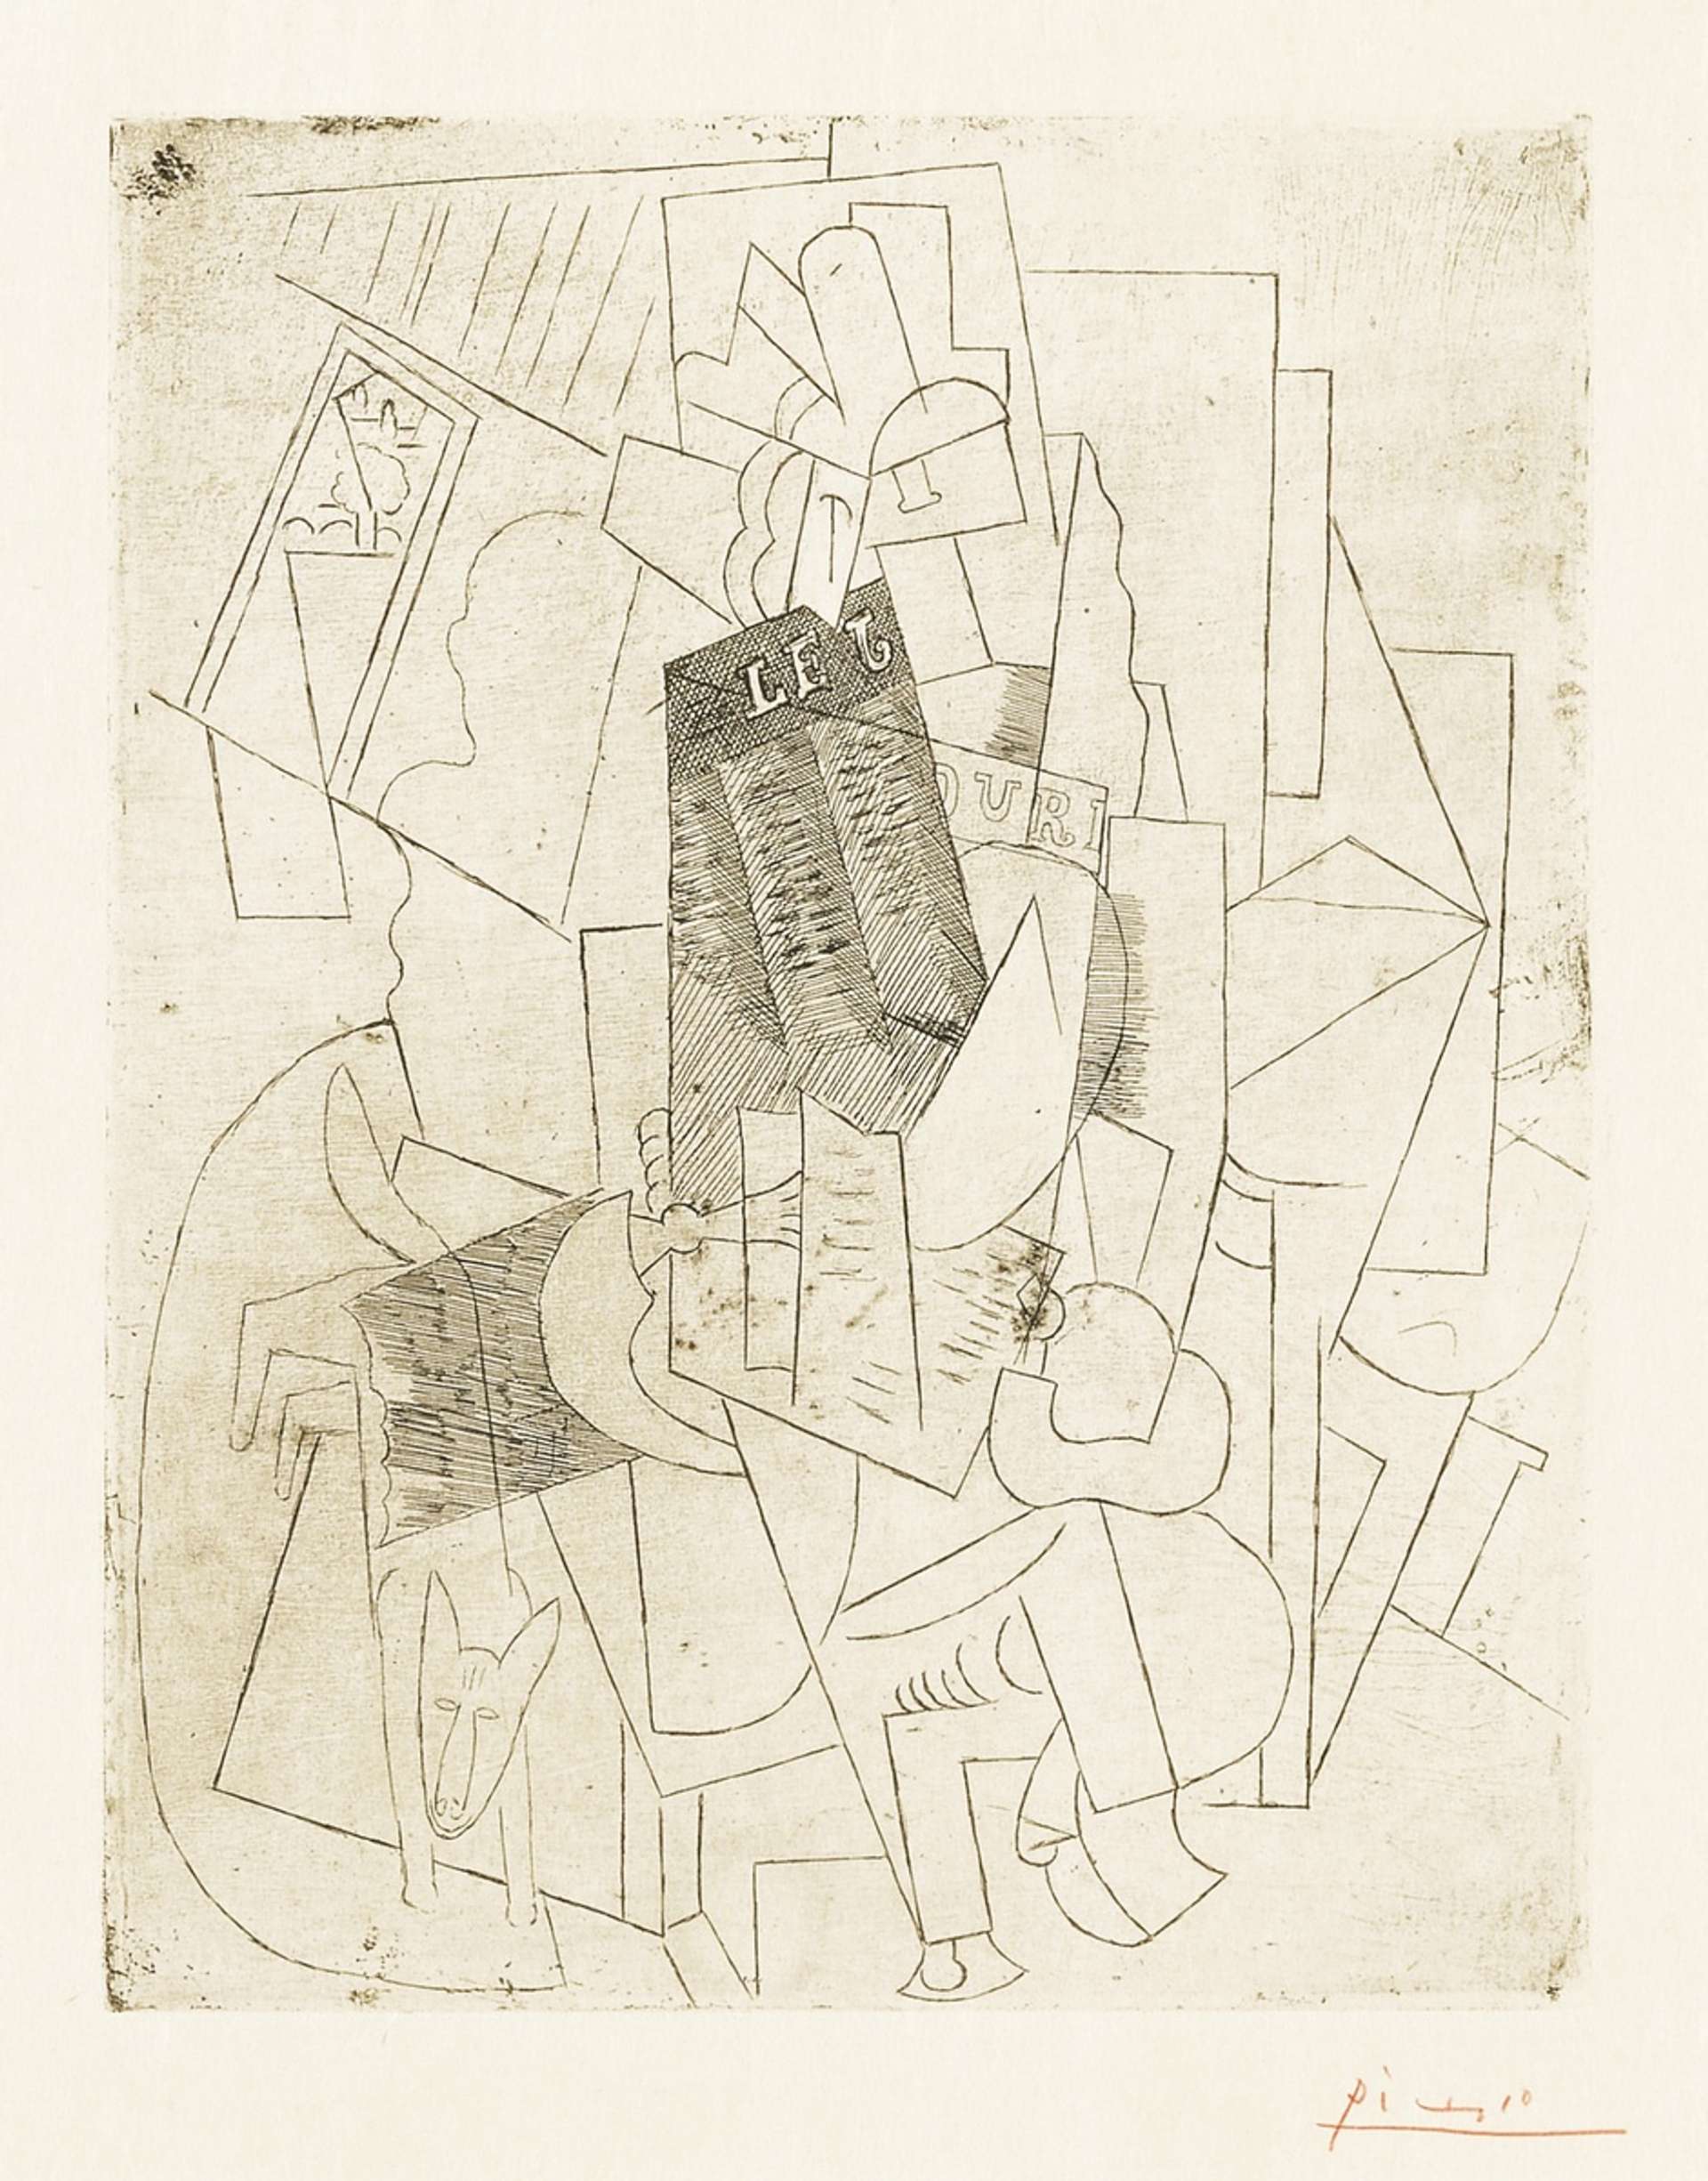 An image of the monochrome print L'Homme Au Chien by Pablo Picasso. It shows a Cubist-style male figure, reading the newspaper with a Cubist dog by his feet.